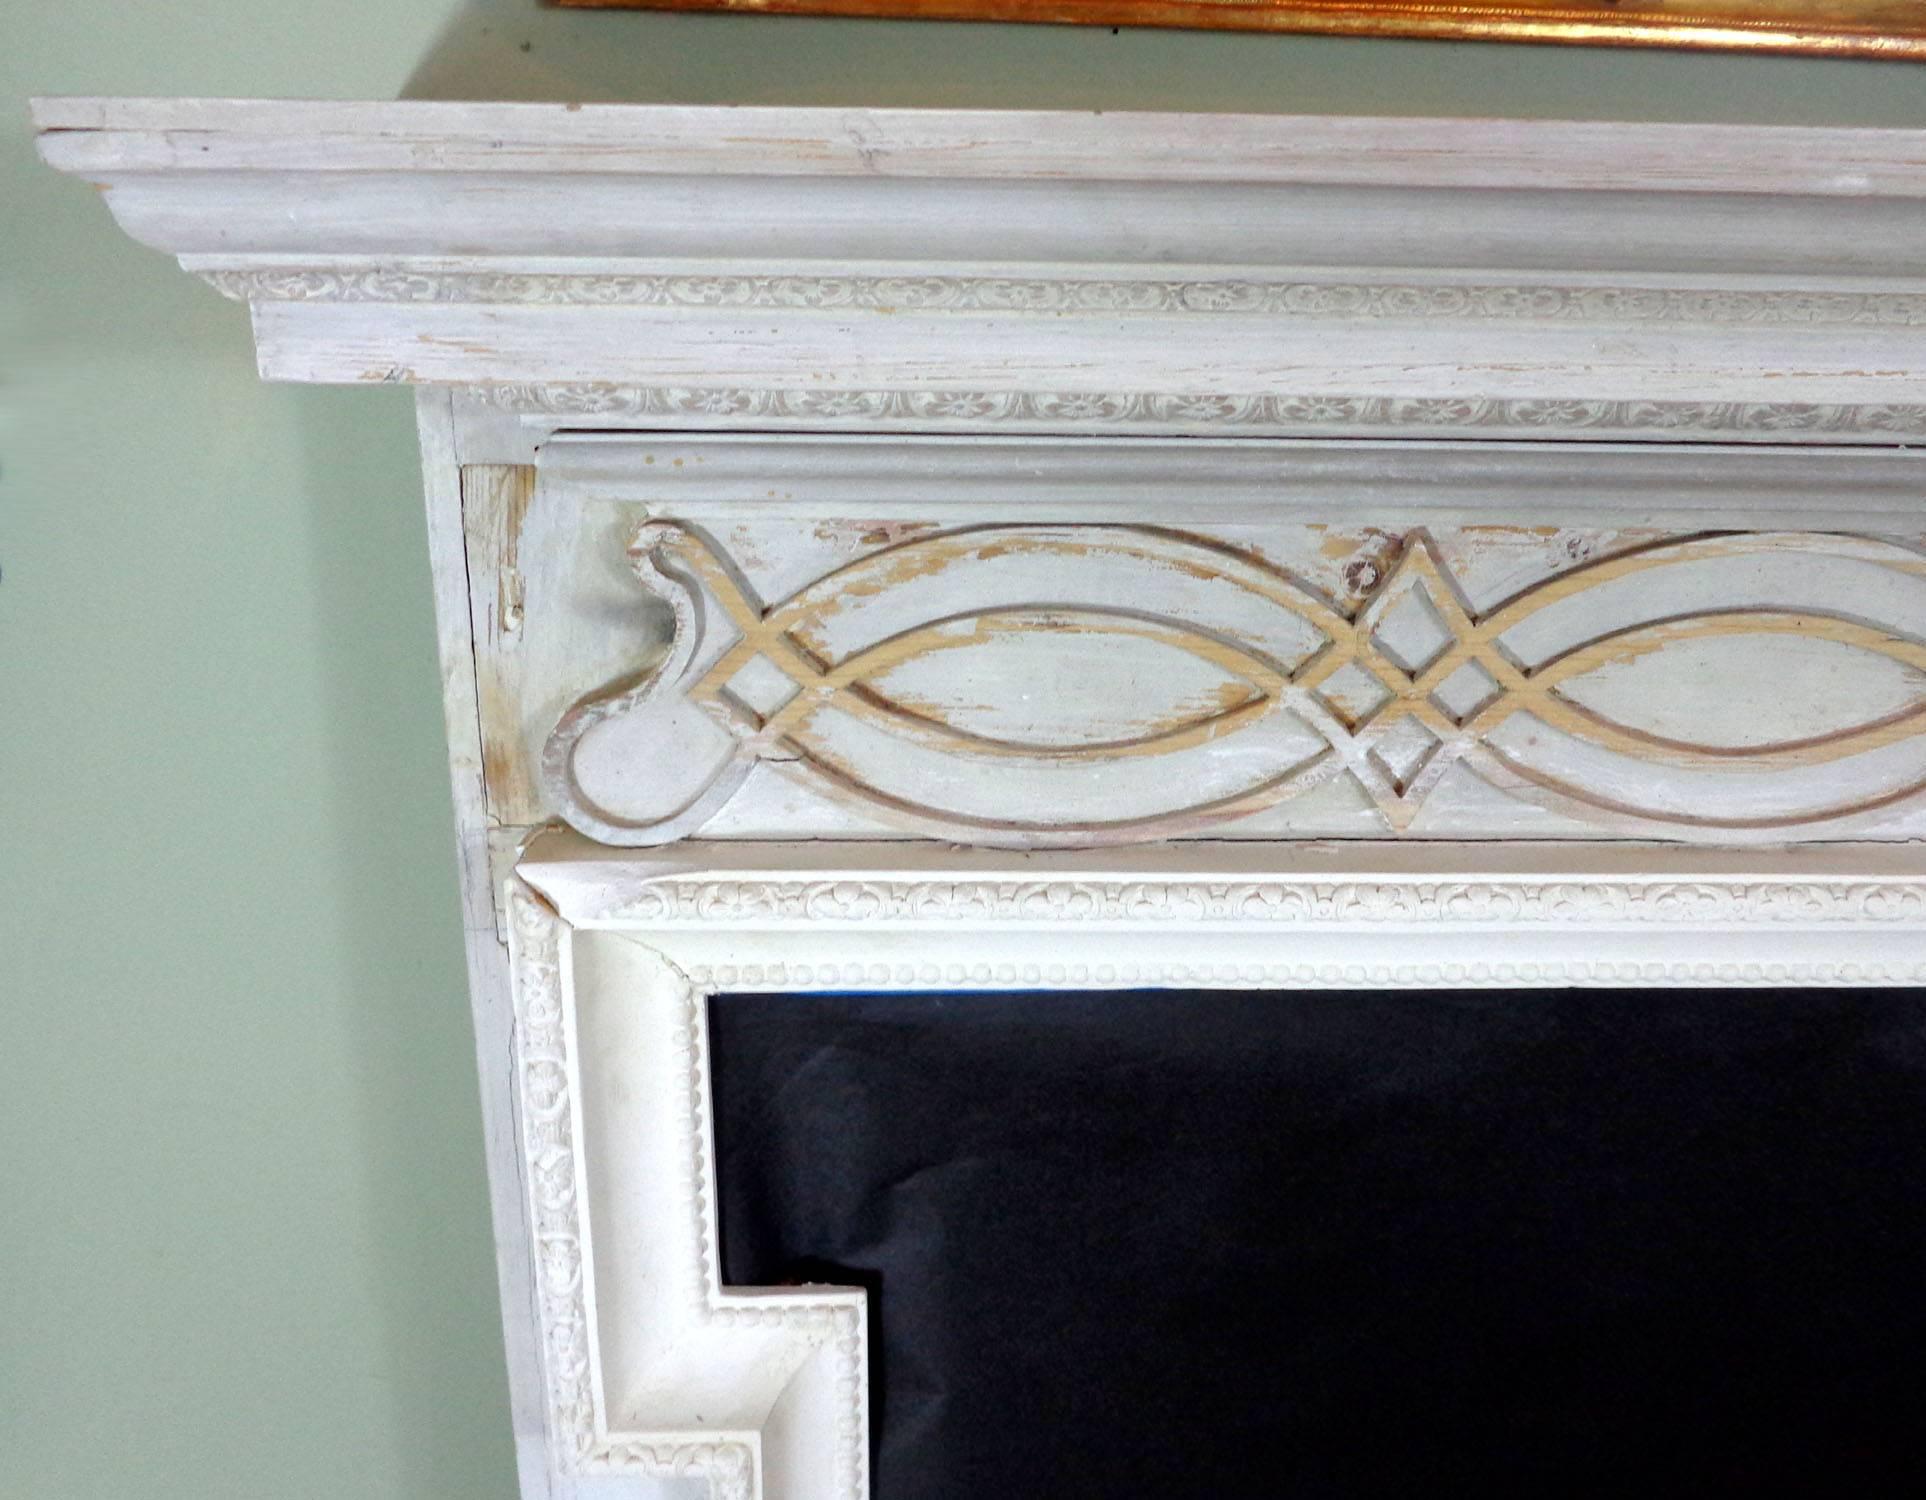 18th Century Georgian style fireplace mantel with a later painted white distressed finish. The opening is surrounded with a carved plaster molding that was added later.
 